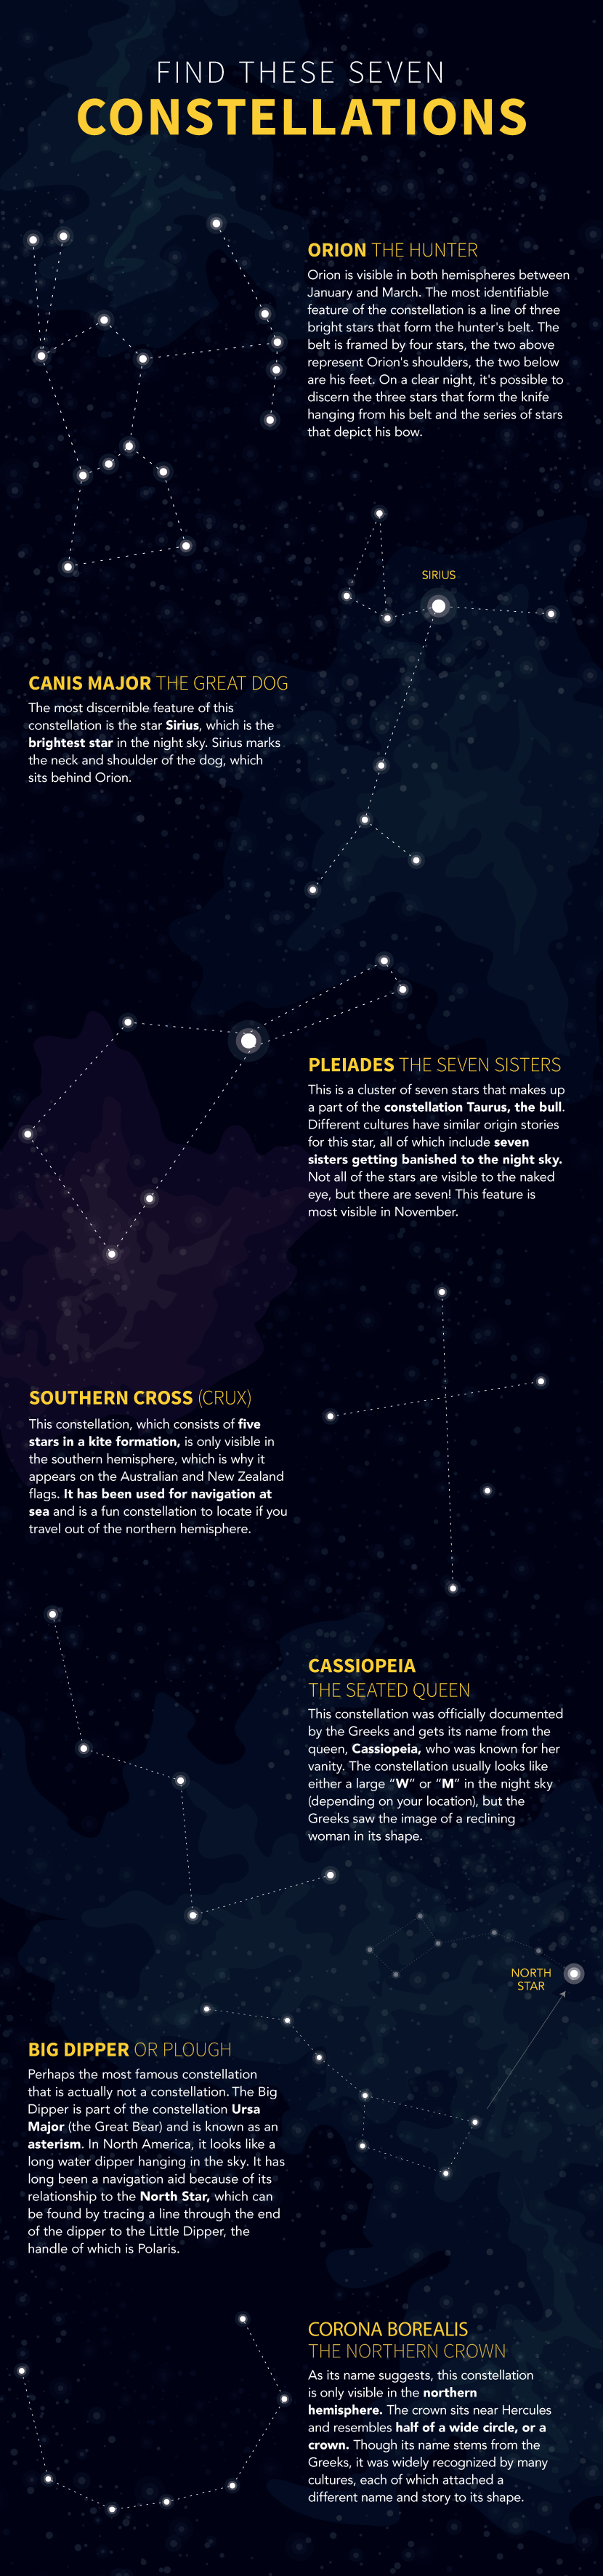 7 Constellations to Learn - Getting Away From Light Pollution